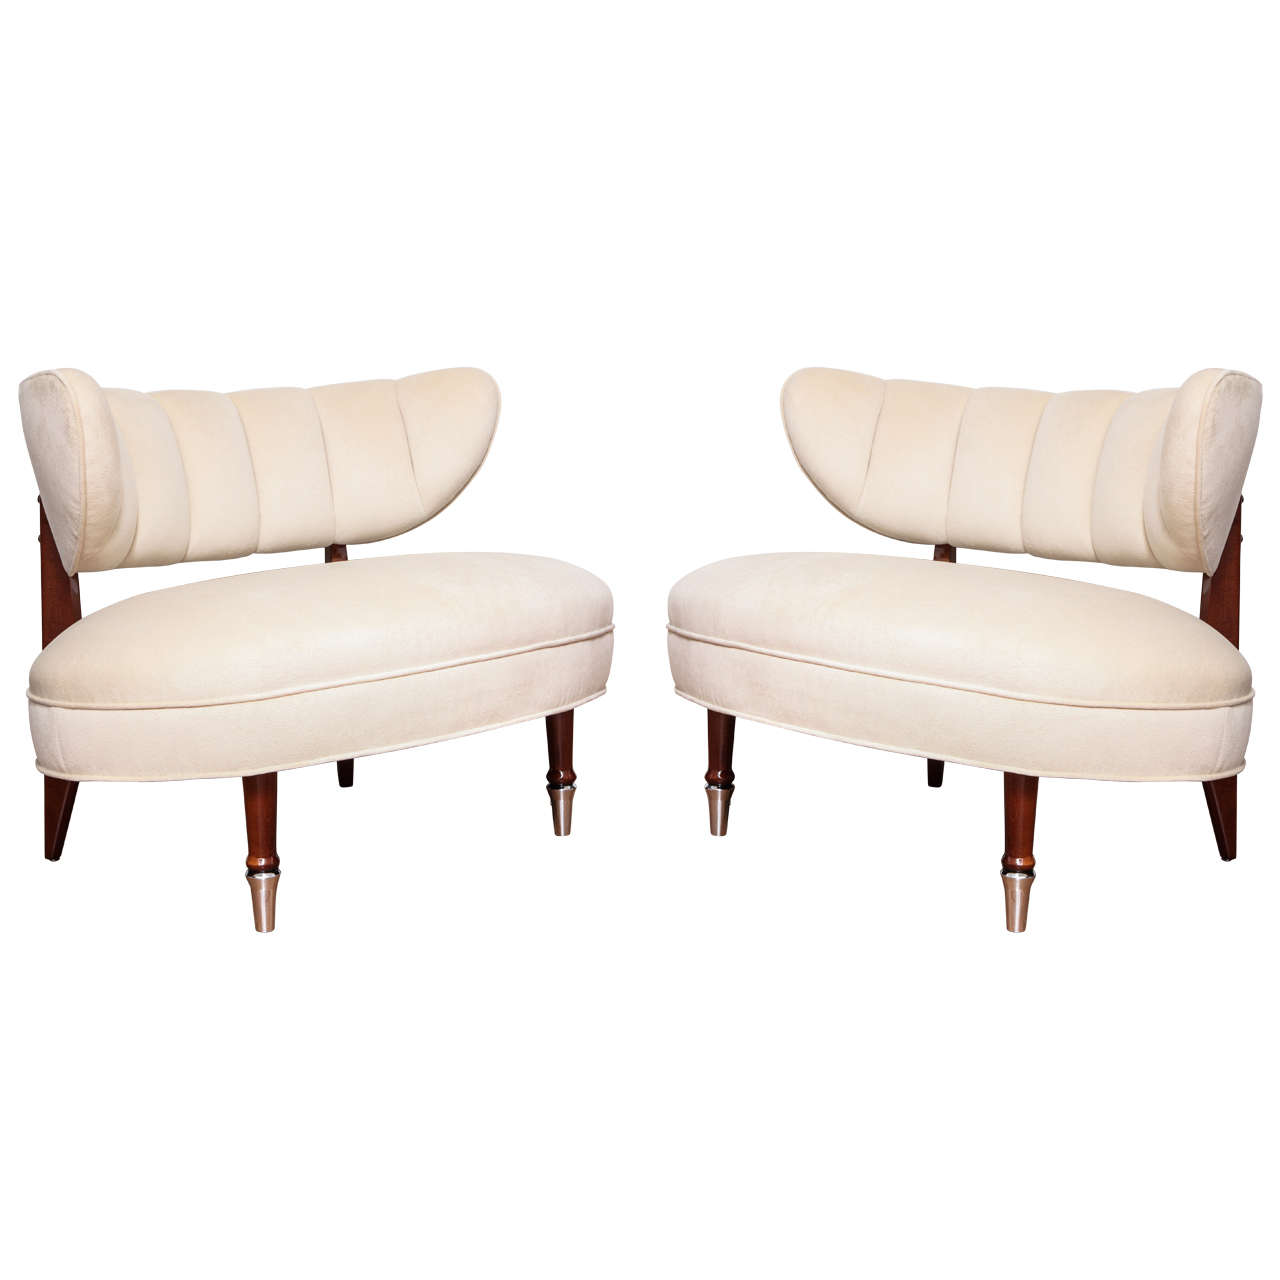 Pair of Channeled Oval Tub Chairs